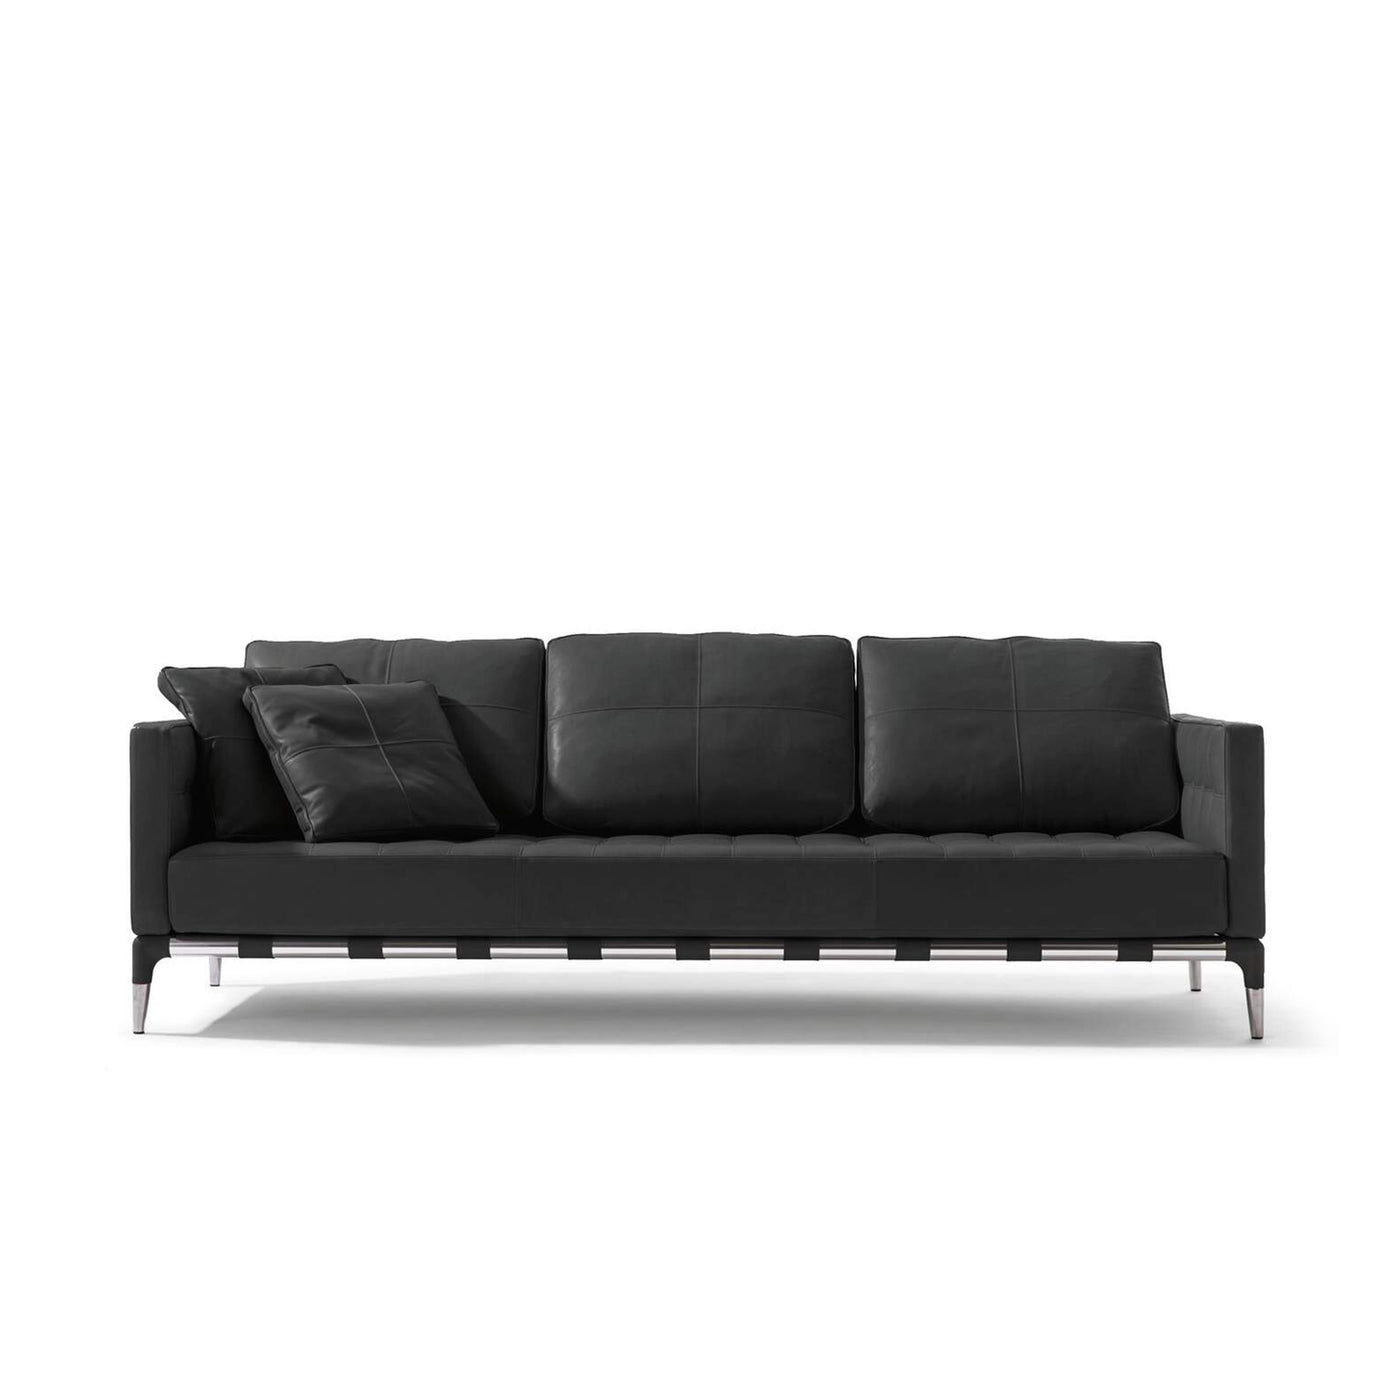 Three-Seater Leather Sofa PRIVE', designed by Philippe Starck for Cassina 03